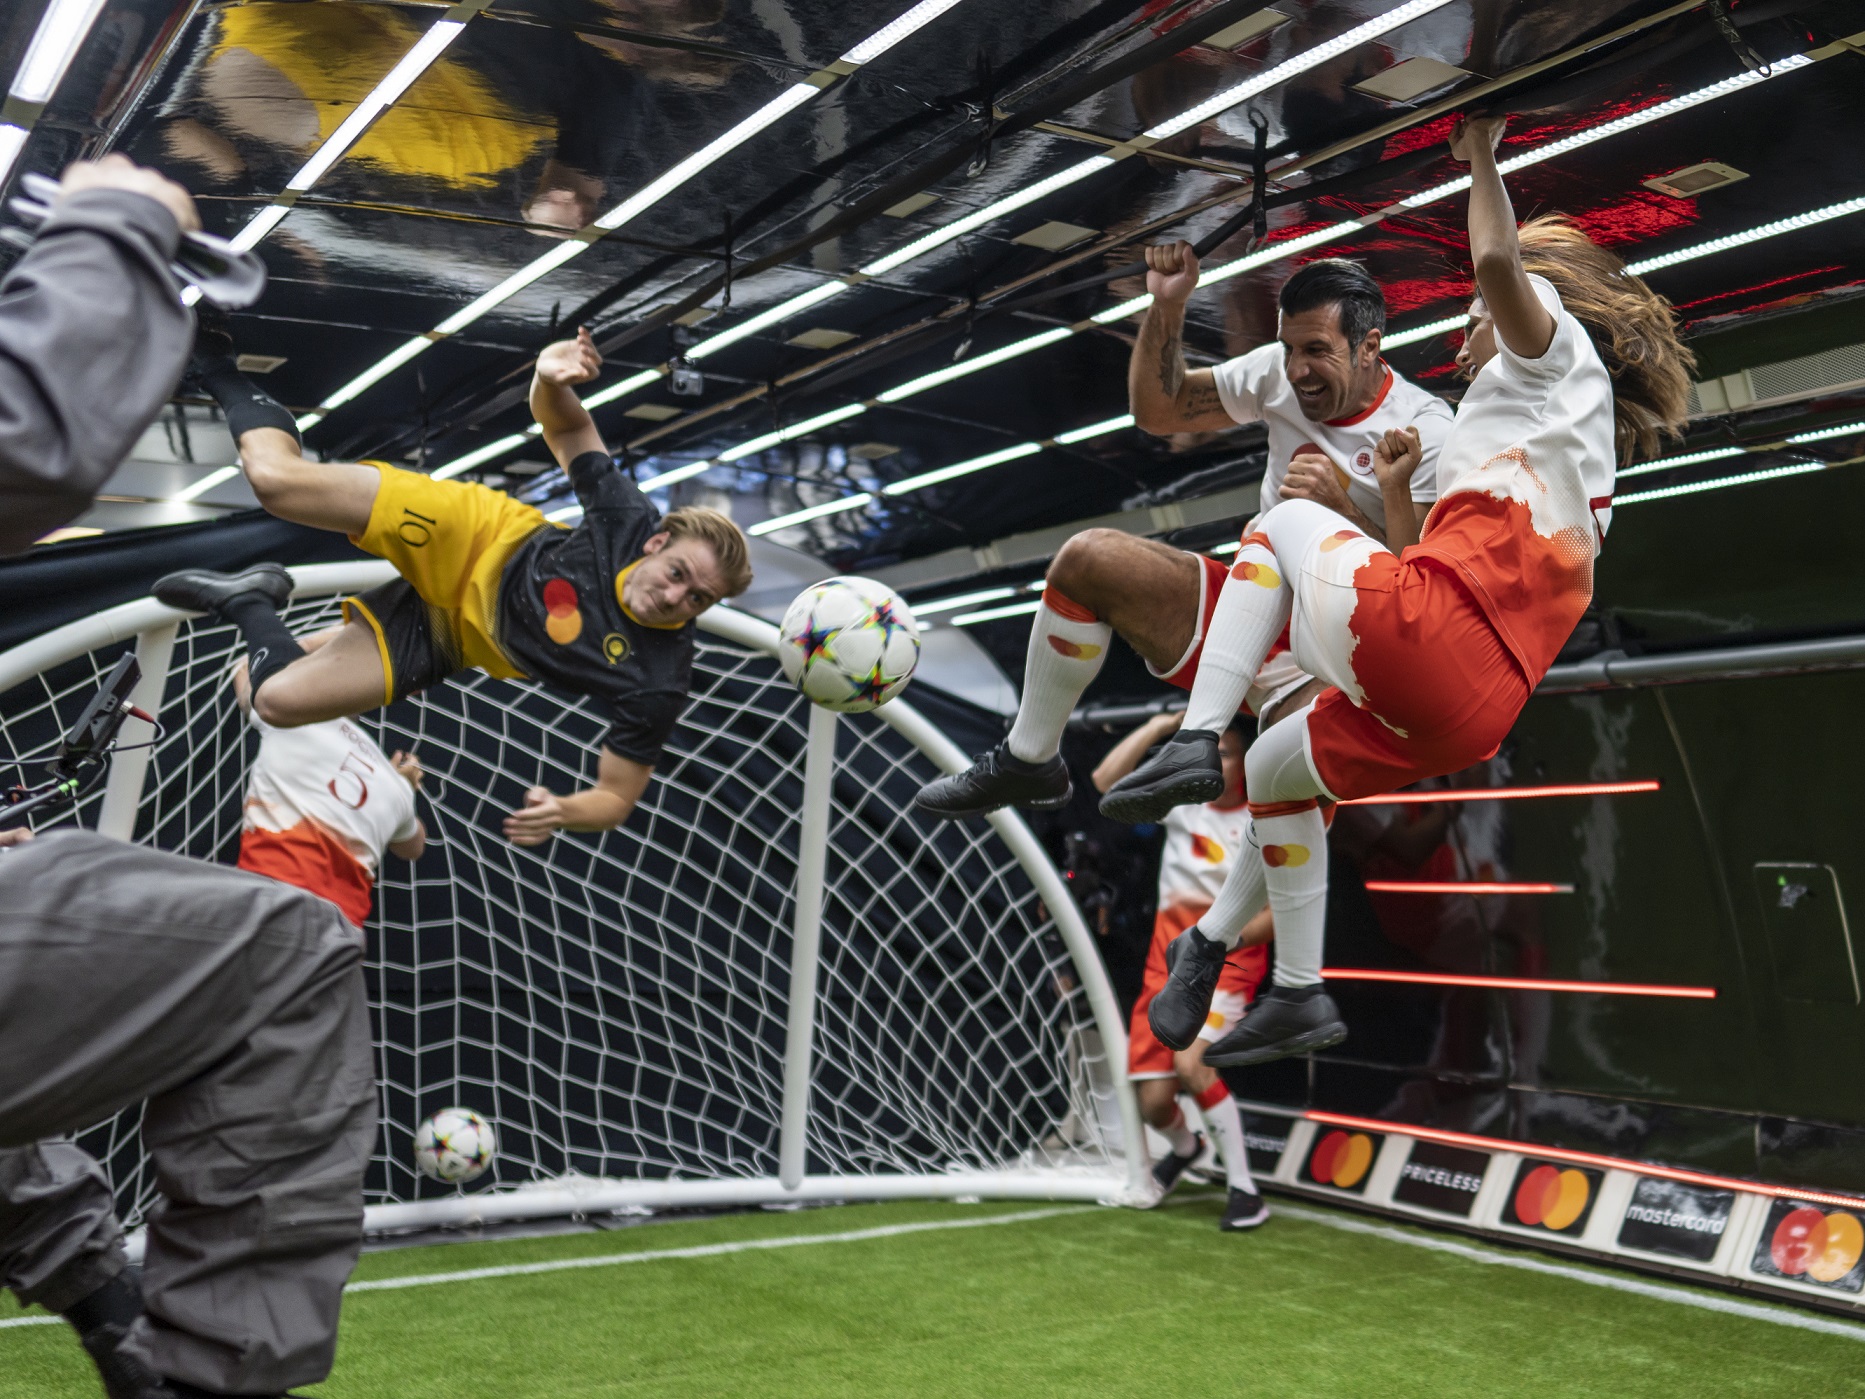 Mastercard sets GUINNESS WORLD RECORDS for the ‘Highest Altitude Game of Football (Soccer) on a Parabolic Flight